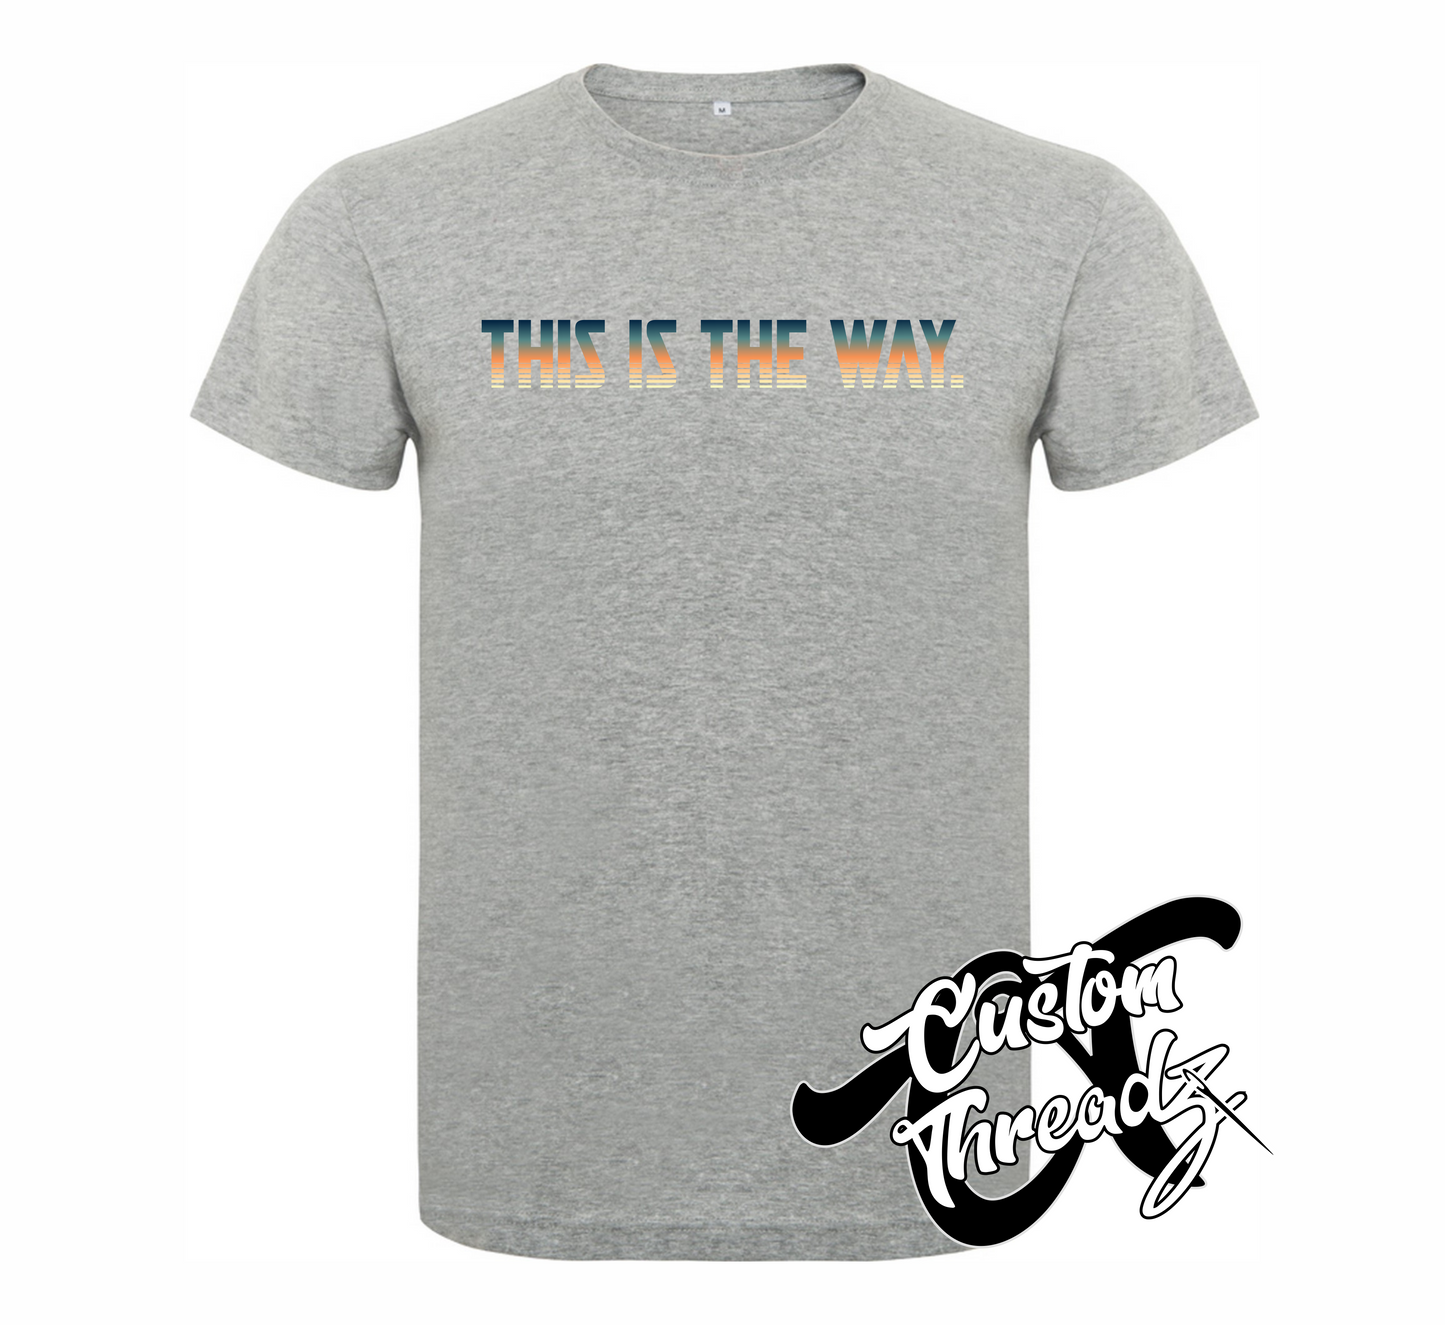 athletic heather grey youth tee with this is the way mandalorian star wars DTG printed design